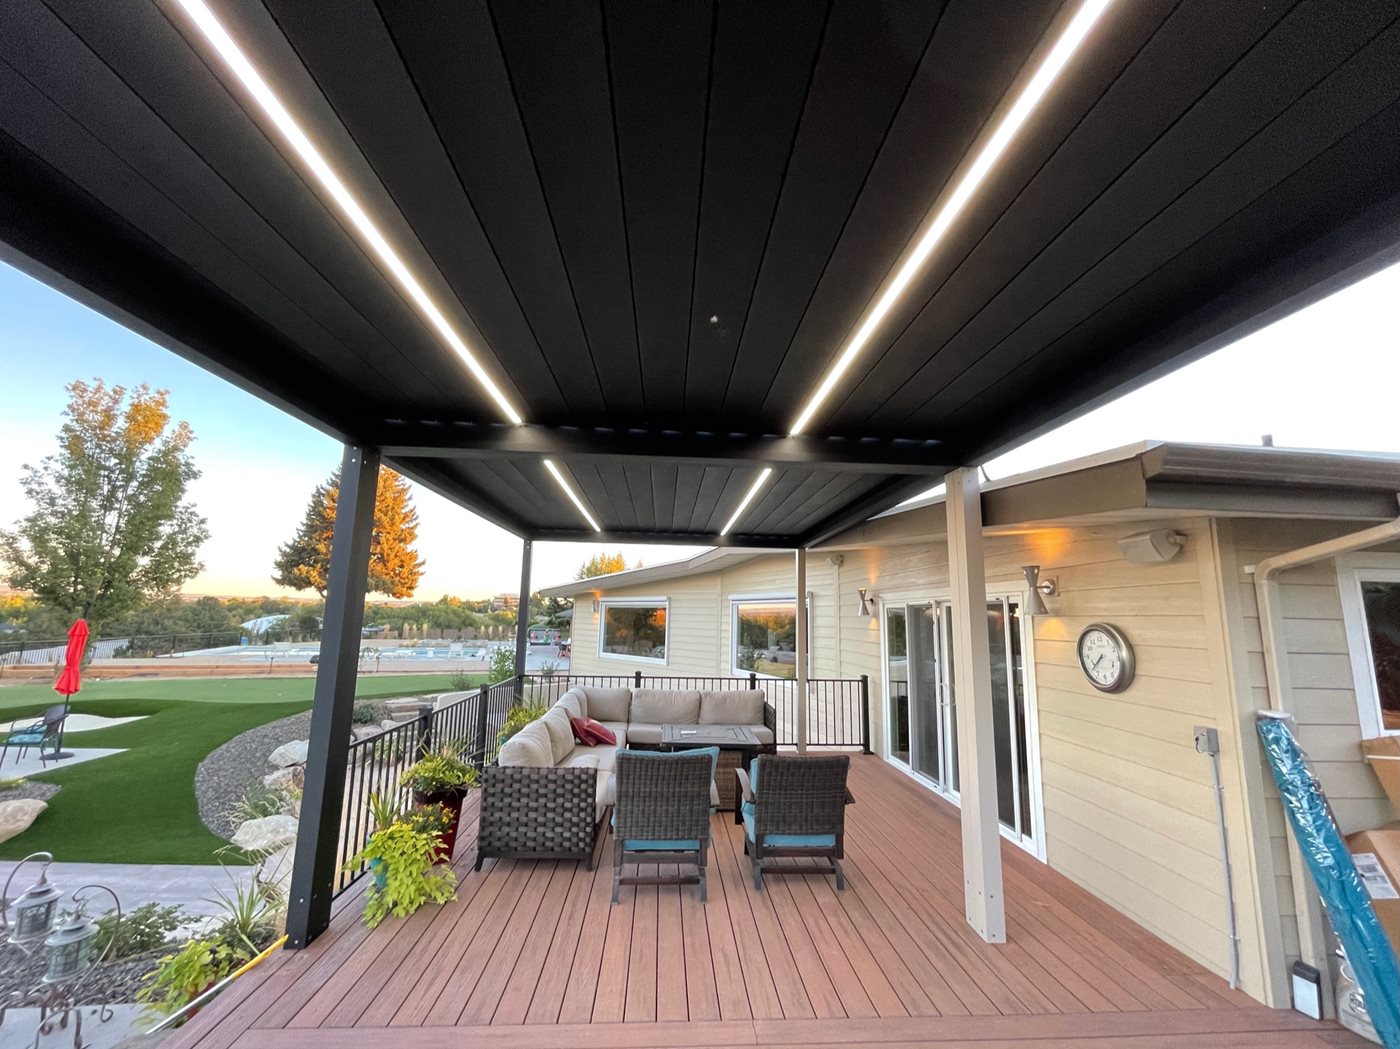 Freestanding,-Side-by-Side-Albas-with-LEDs-in-Idaho-by-Blind-Appeal-(1).JPG